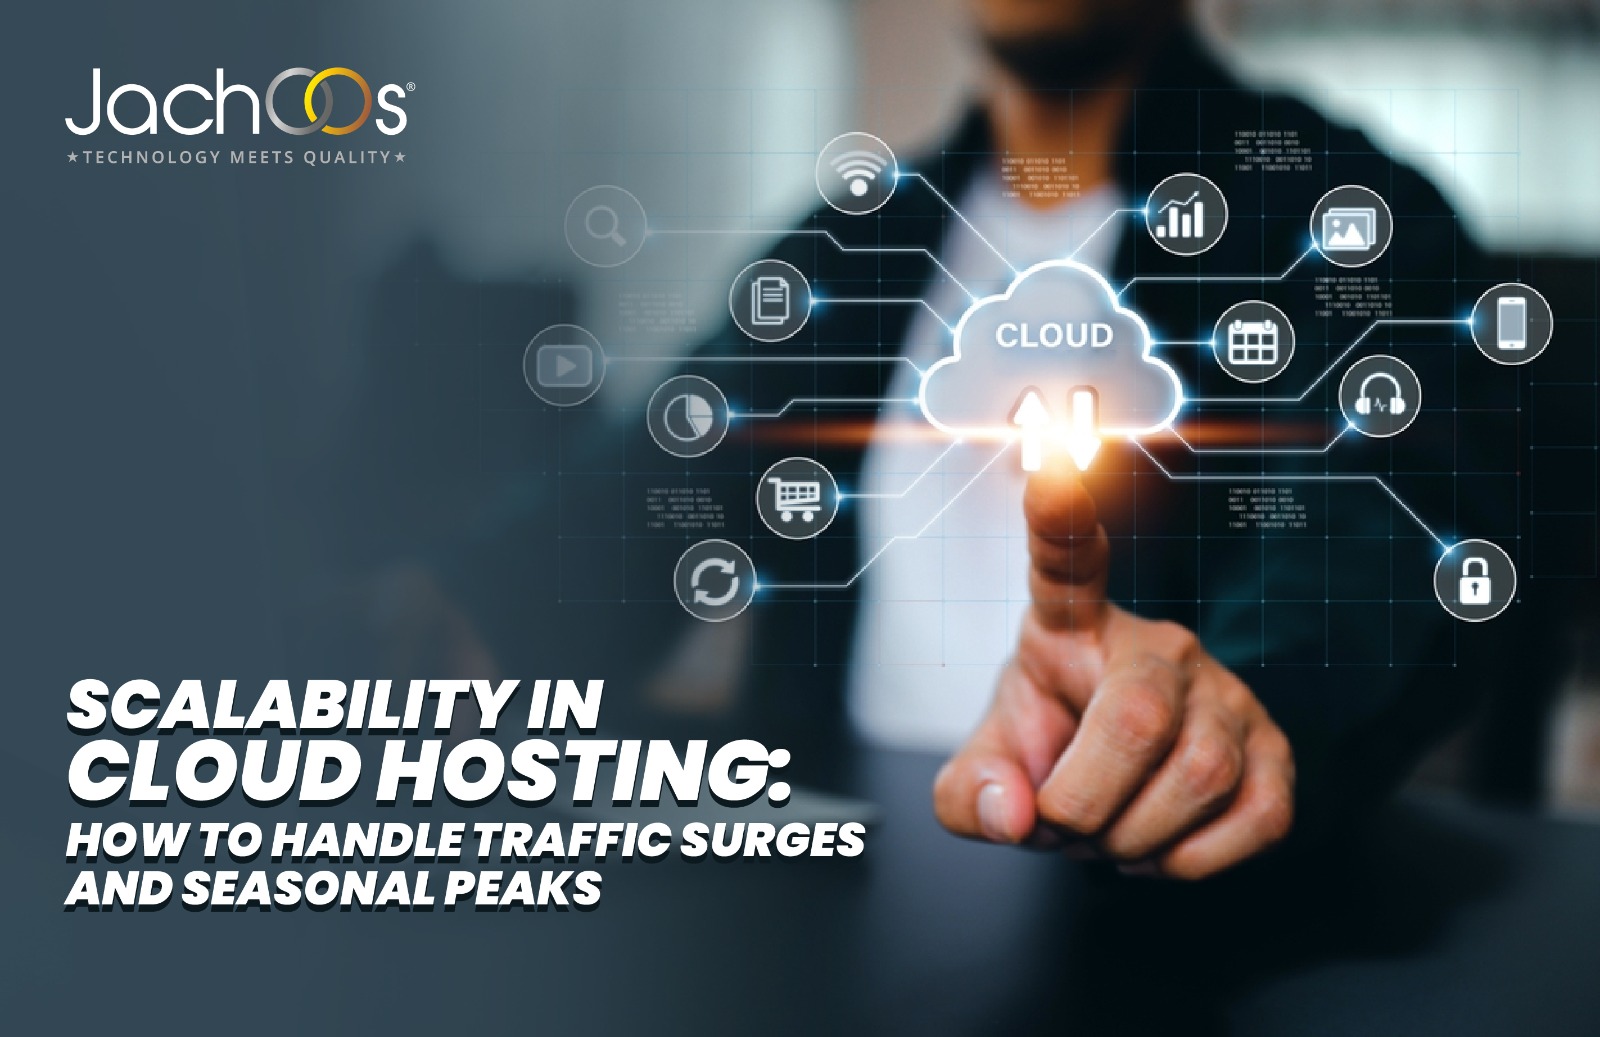 Scalability in Cloud Hosting: How to Handle Traffic Surges and Seasonal Peaks